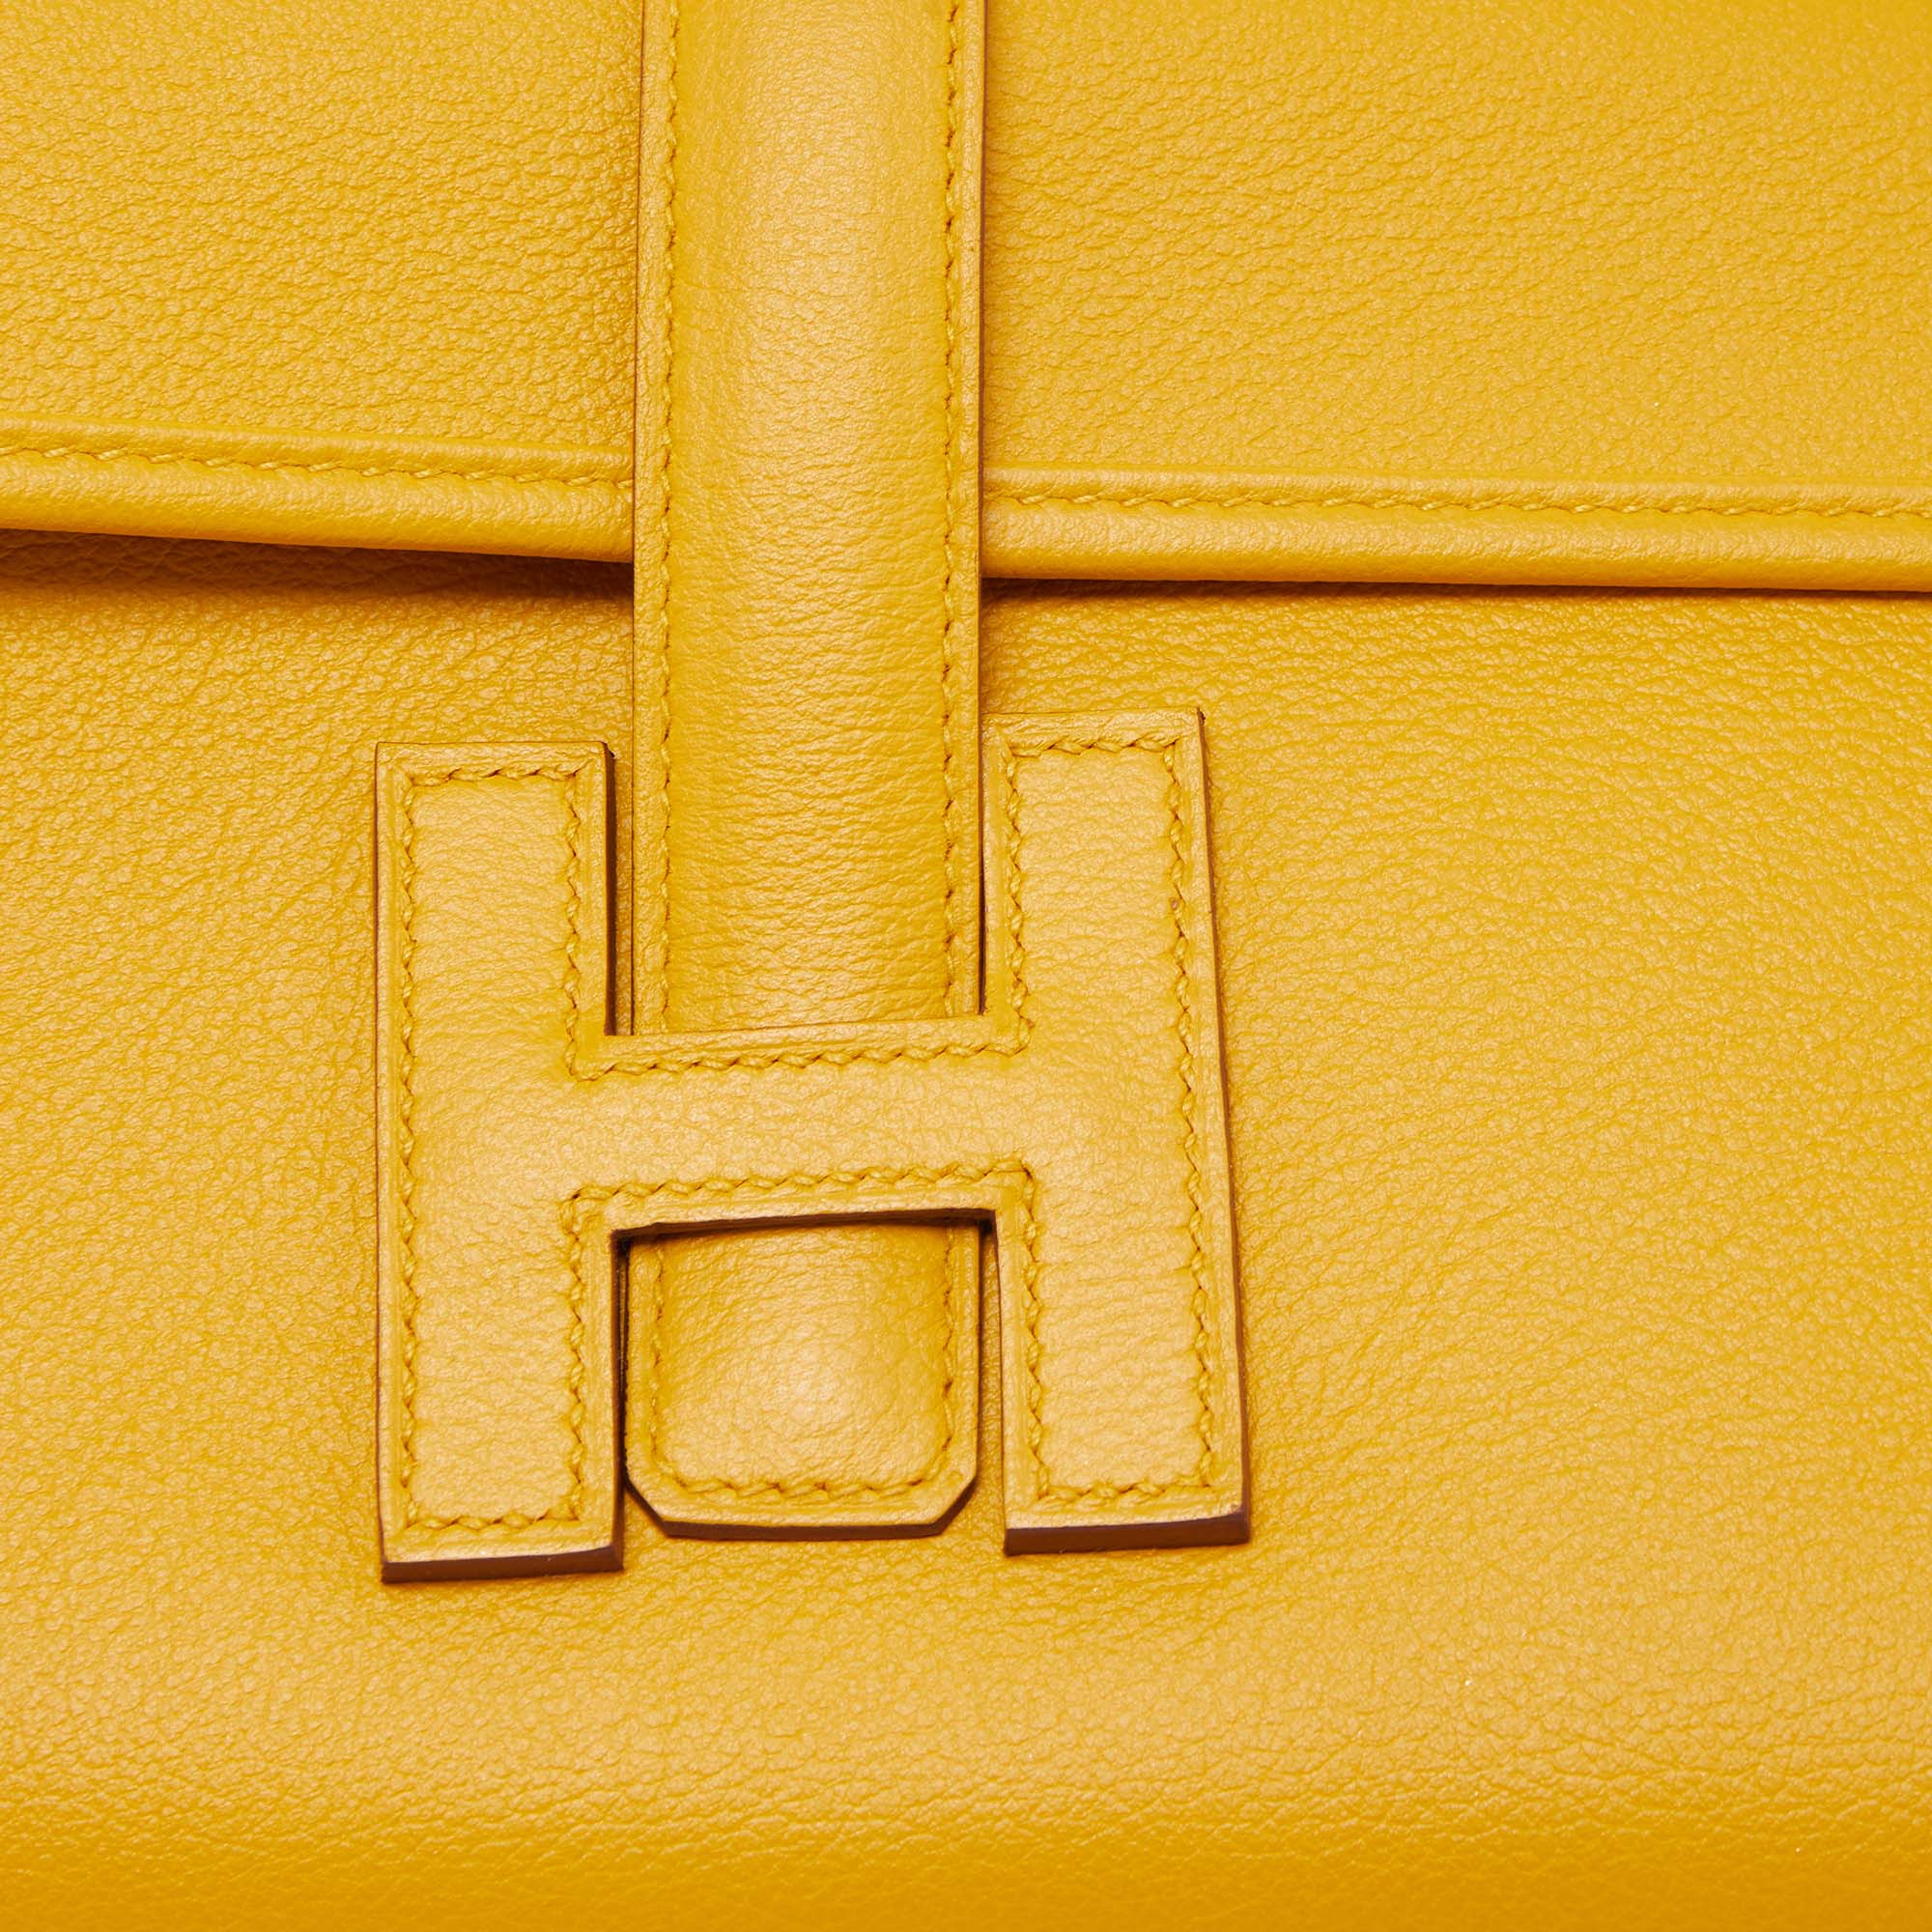 Hermes Jige Clutch in evercolor jaune ambre yellow in stamp c